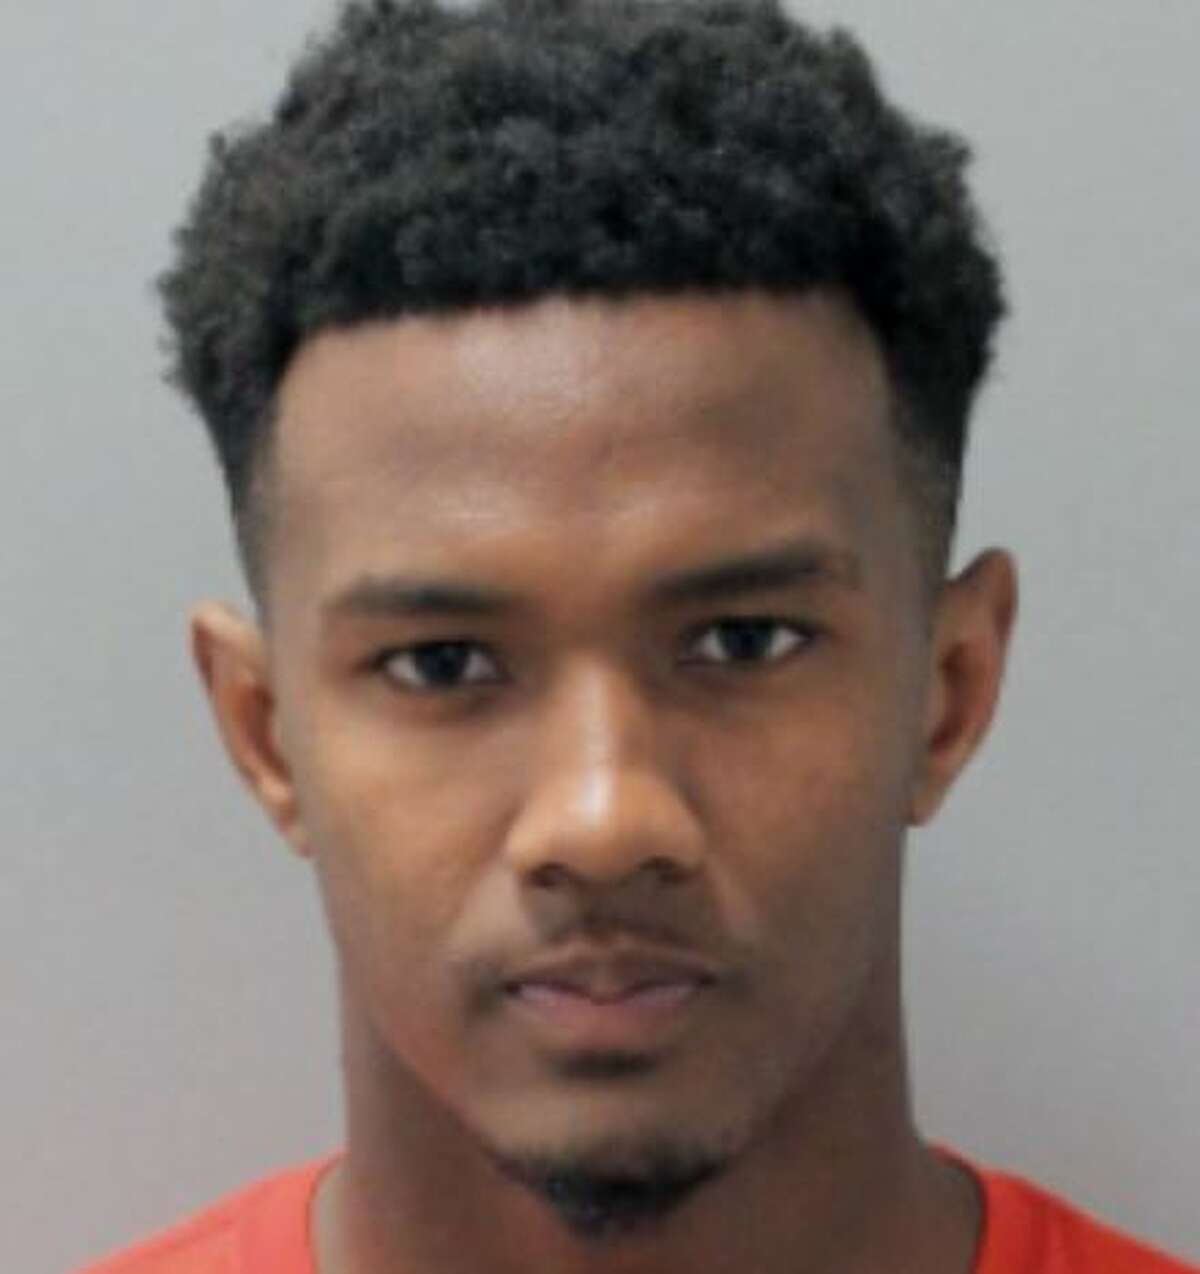 University of Houston cornerback Ka'Darian Smith was arrested and charged with aggravated assault on Nov. 6, 2019.